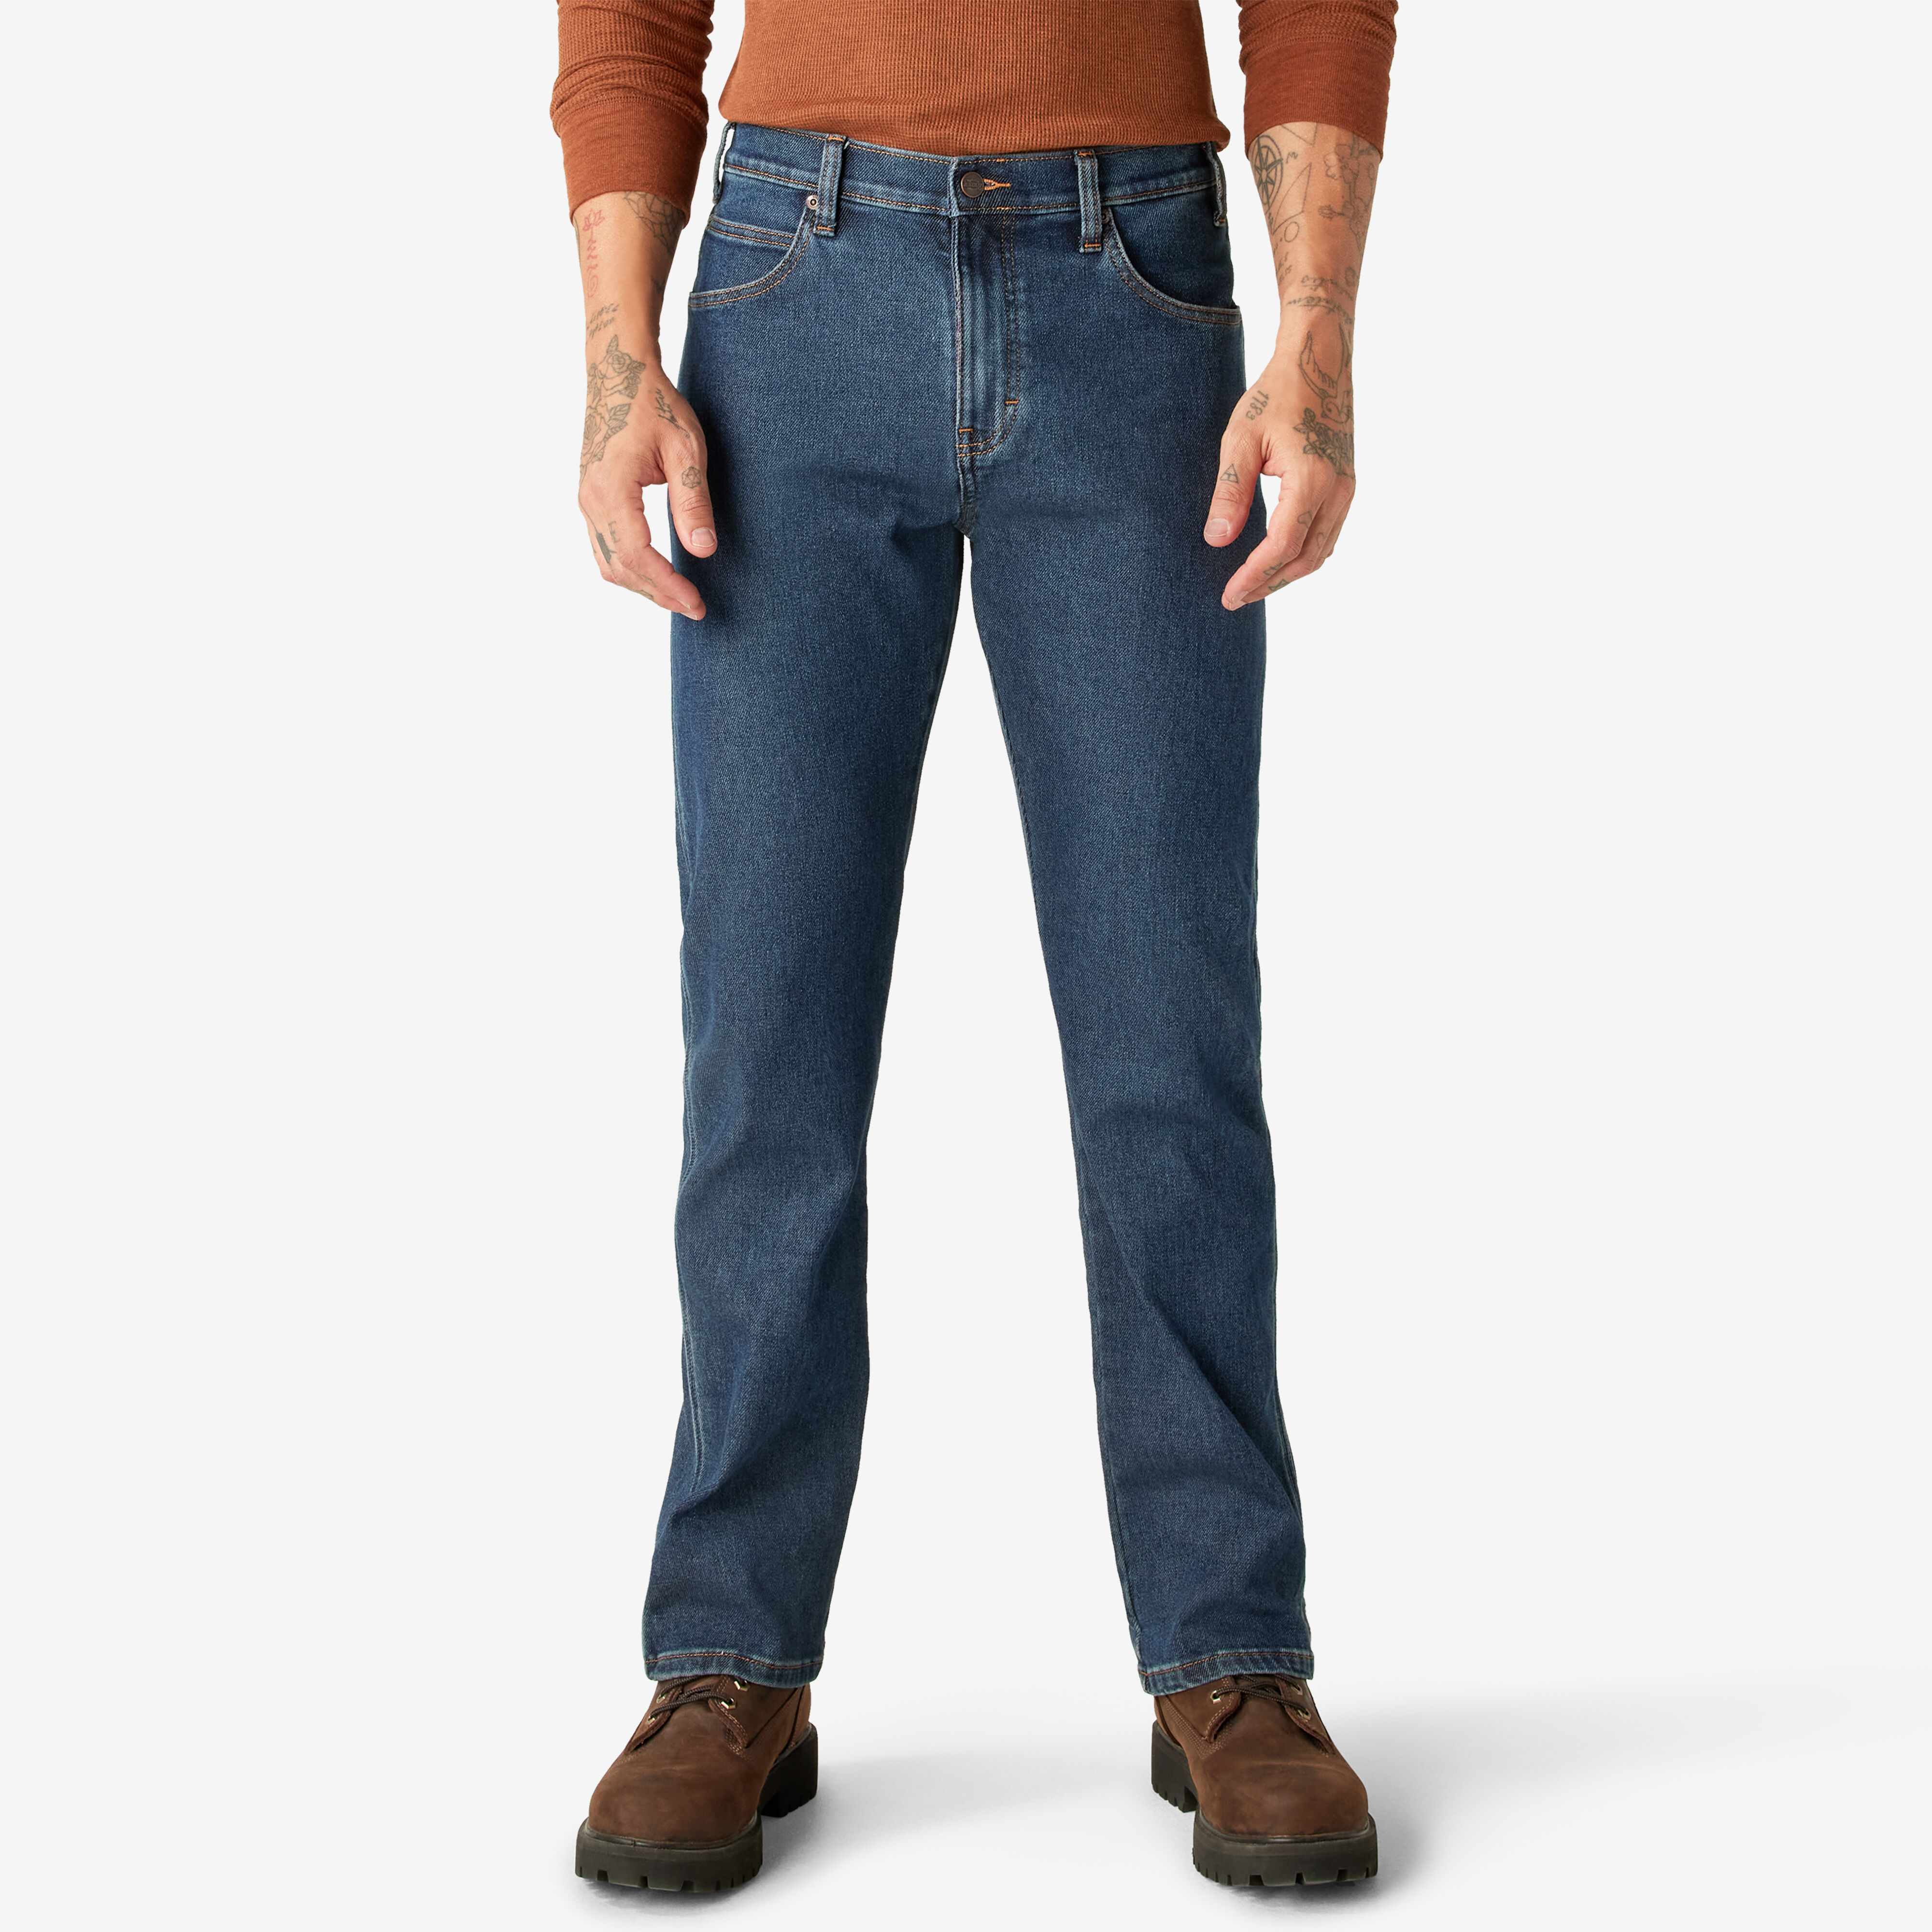 flannel lined jeans mens sale